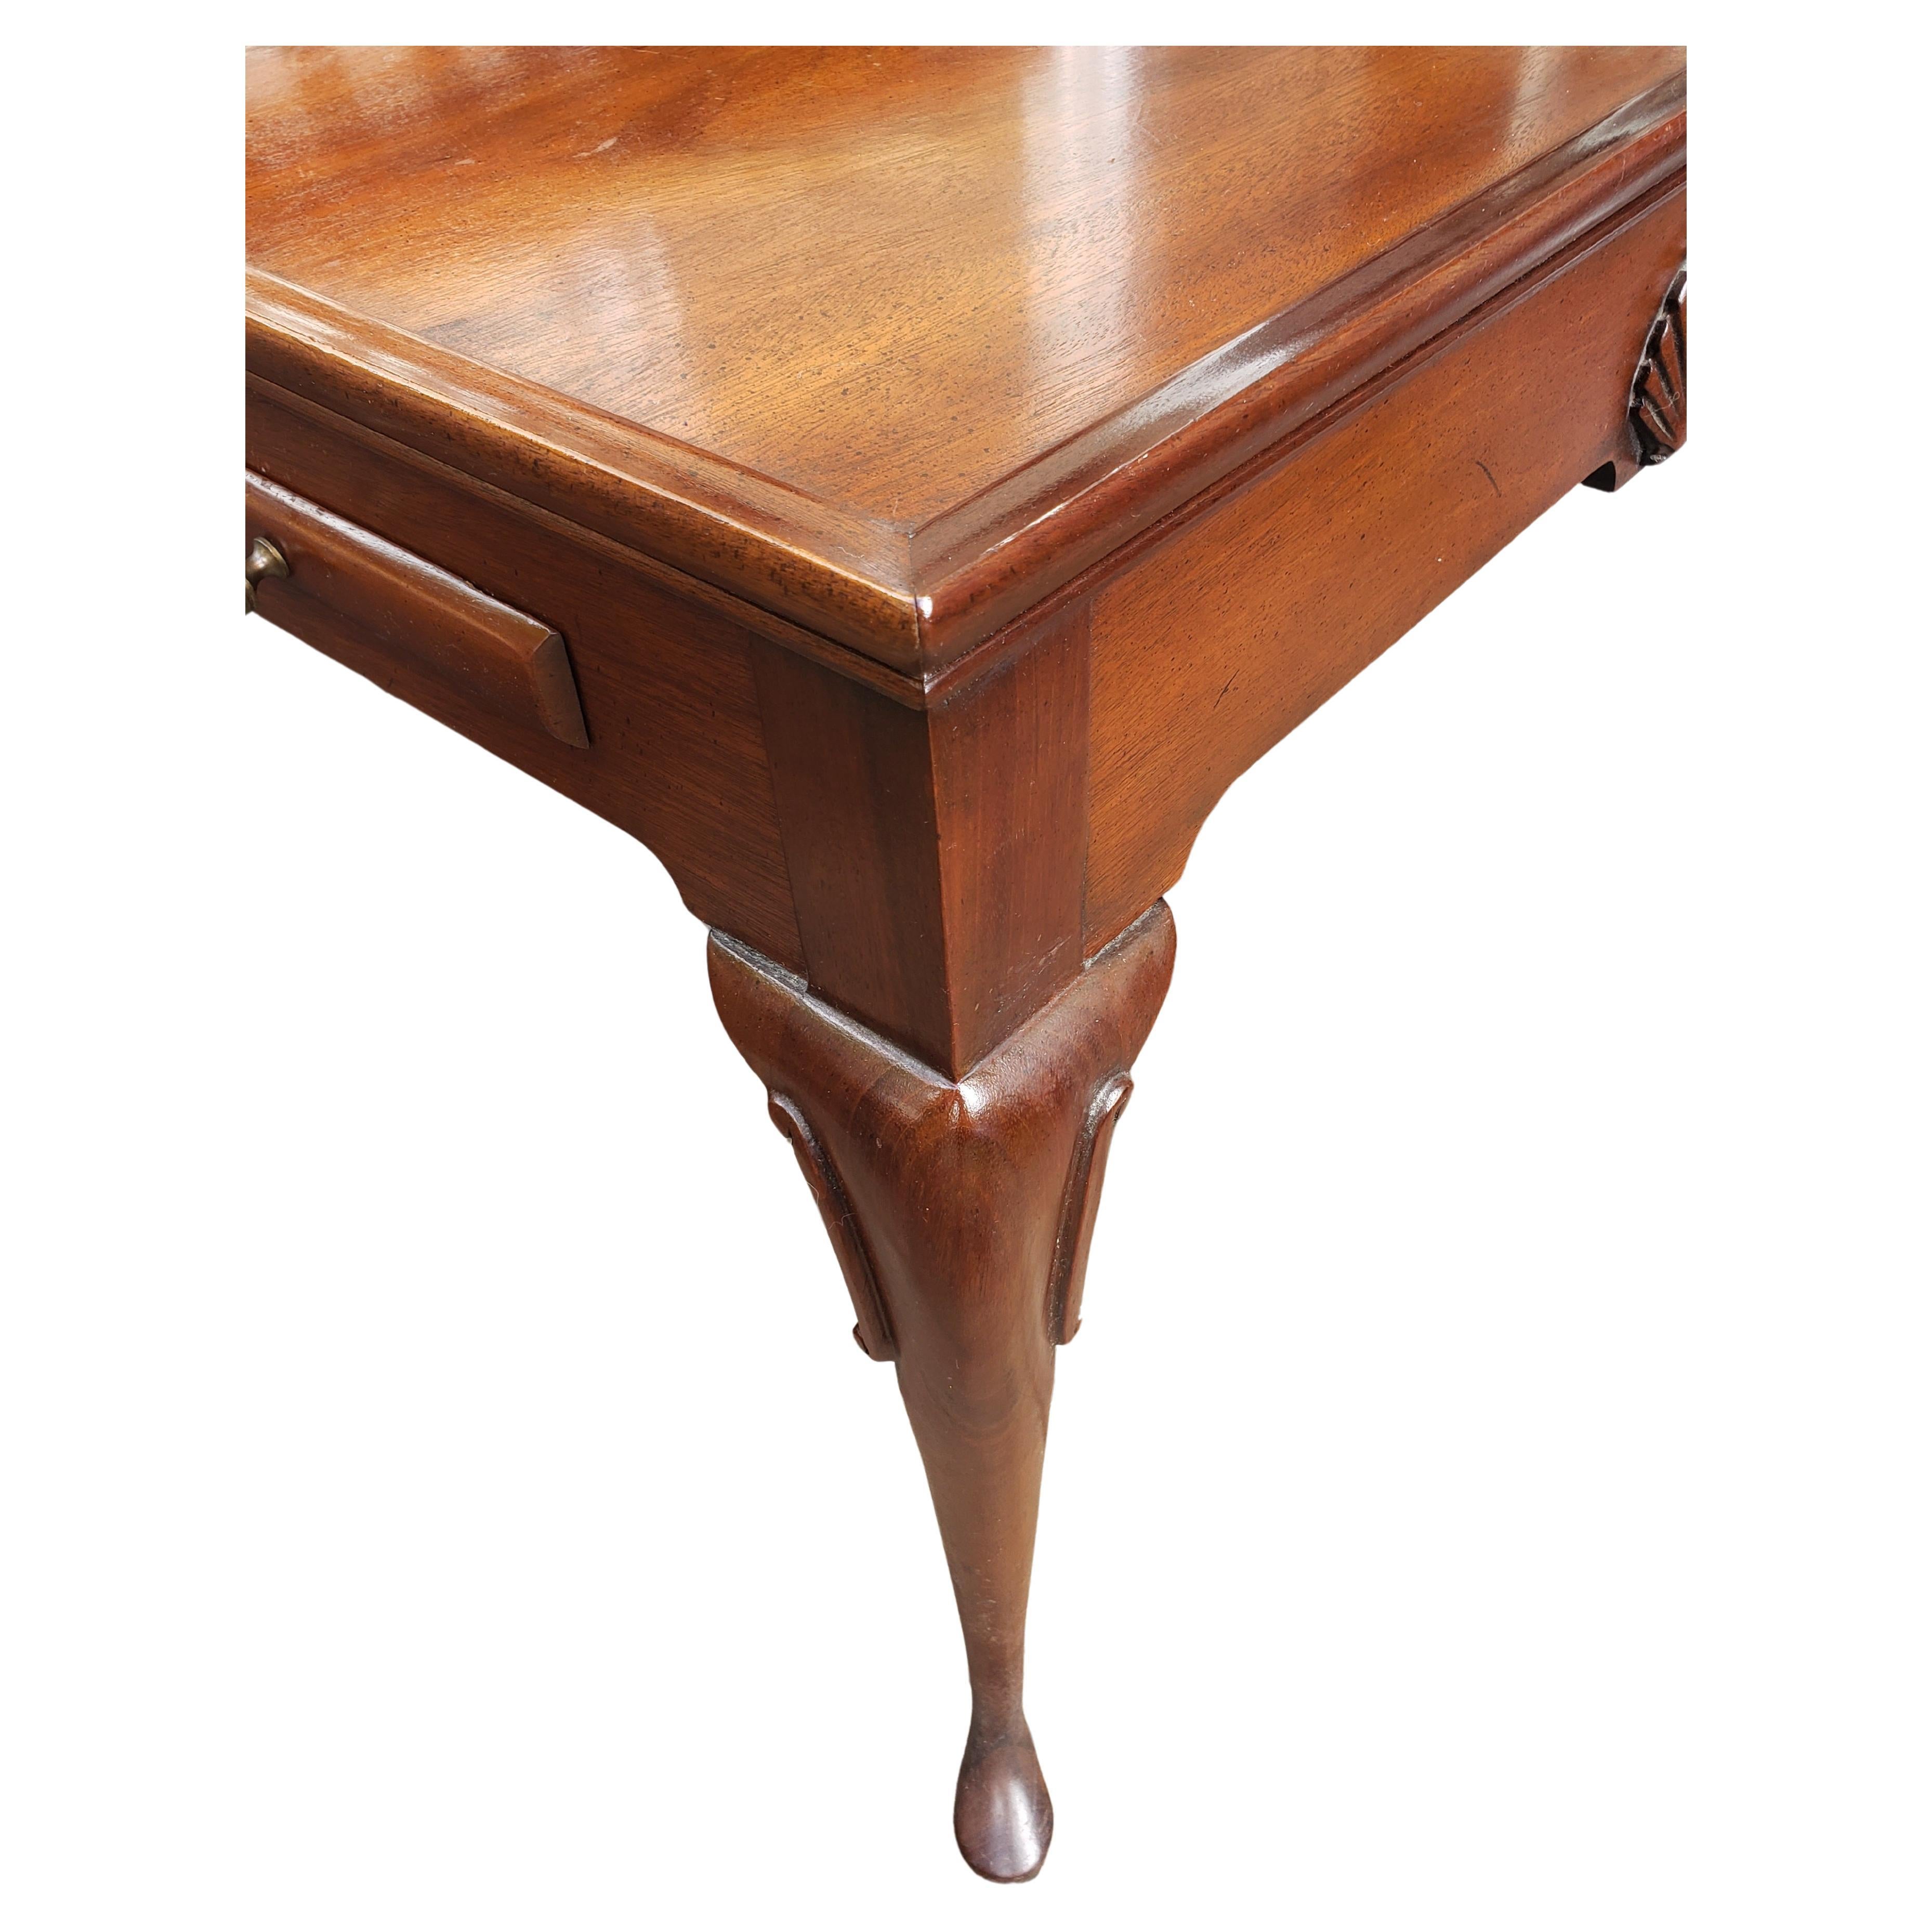 American 1950s English Mahogany Queen Anne Tray Top Tea Table by Hickory Chair Co. For Sale